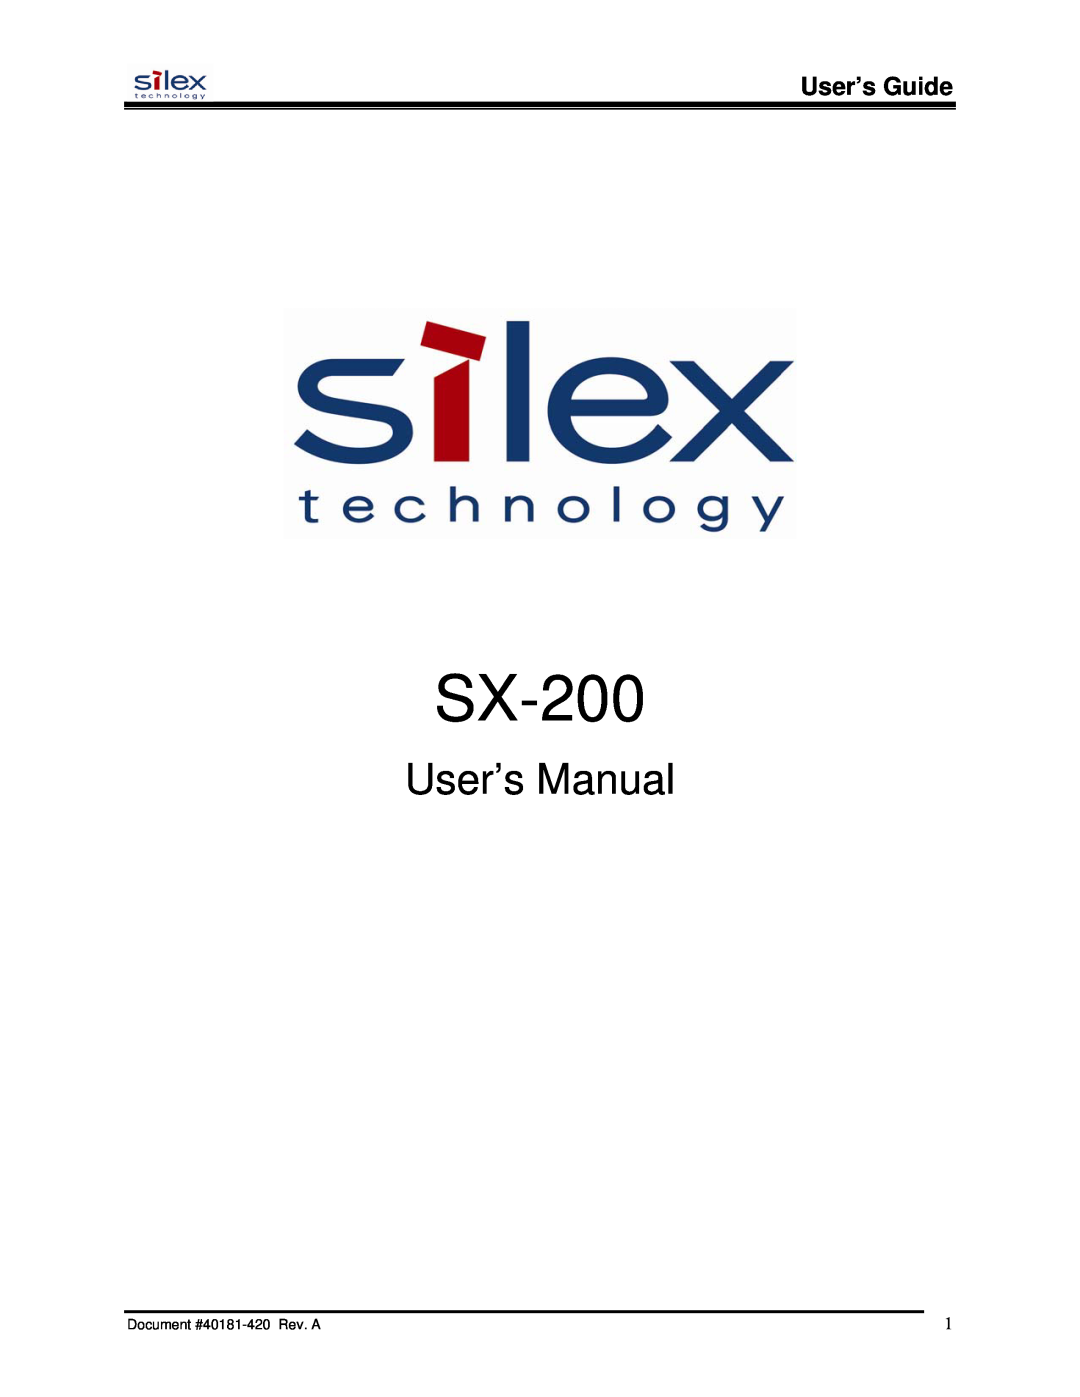 Silex technology SX-200 user manual User’s Guide, User’s Manual, Document #40181-420 Rev. A 